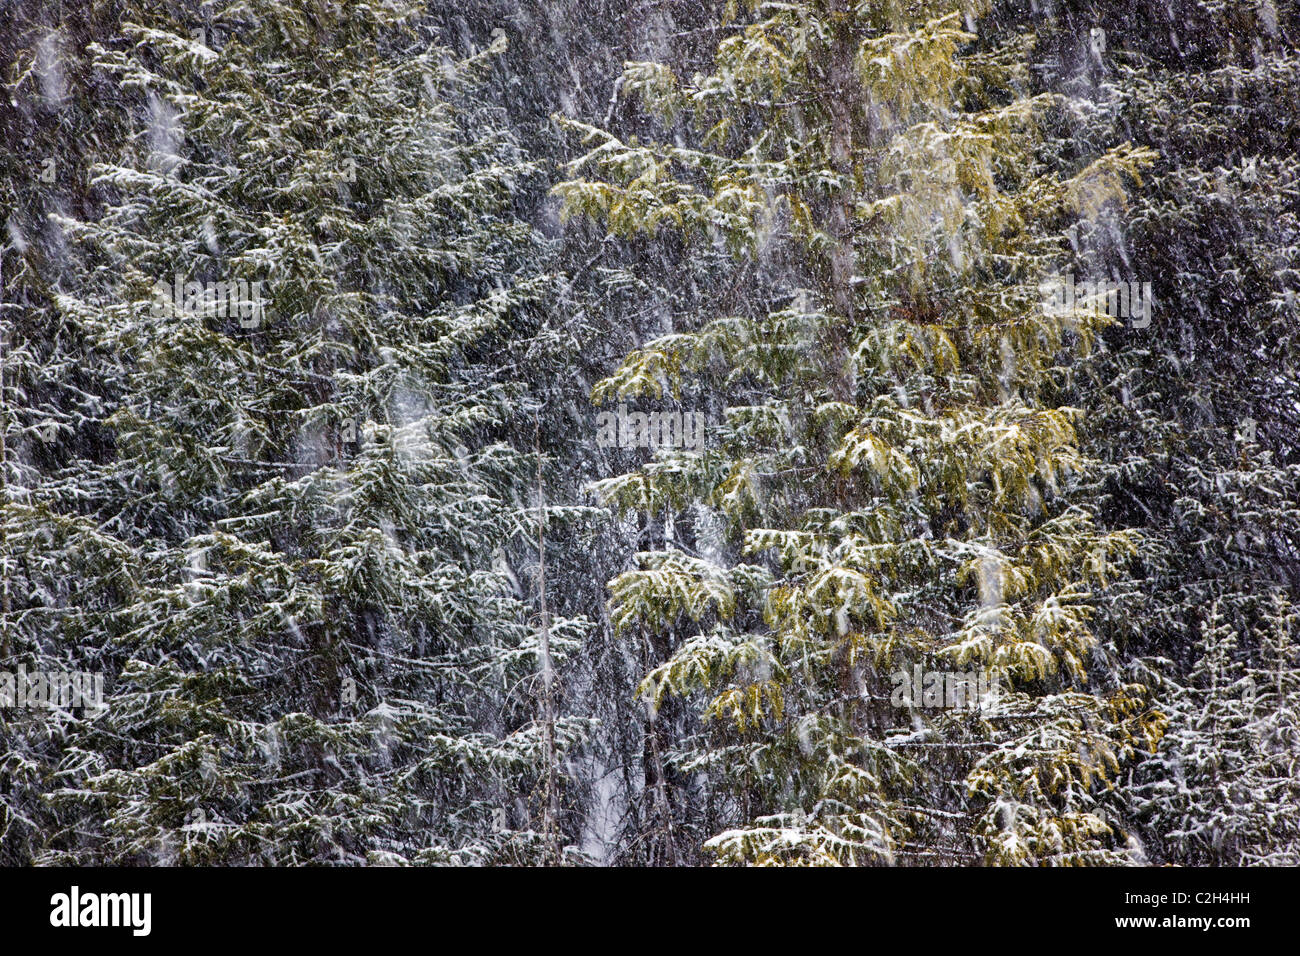 Close up of evergreen trees in spring snowstorm along Cement Creek, Colorado state highway 110, near Silverton, Colorado, USA Stock Photo